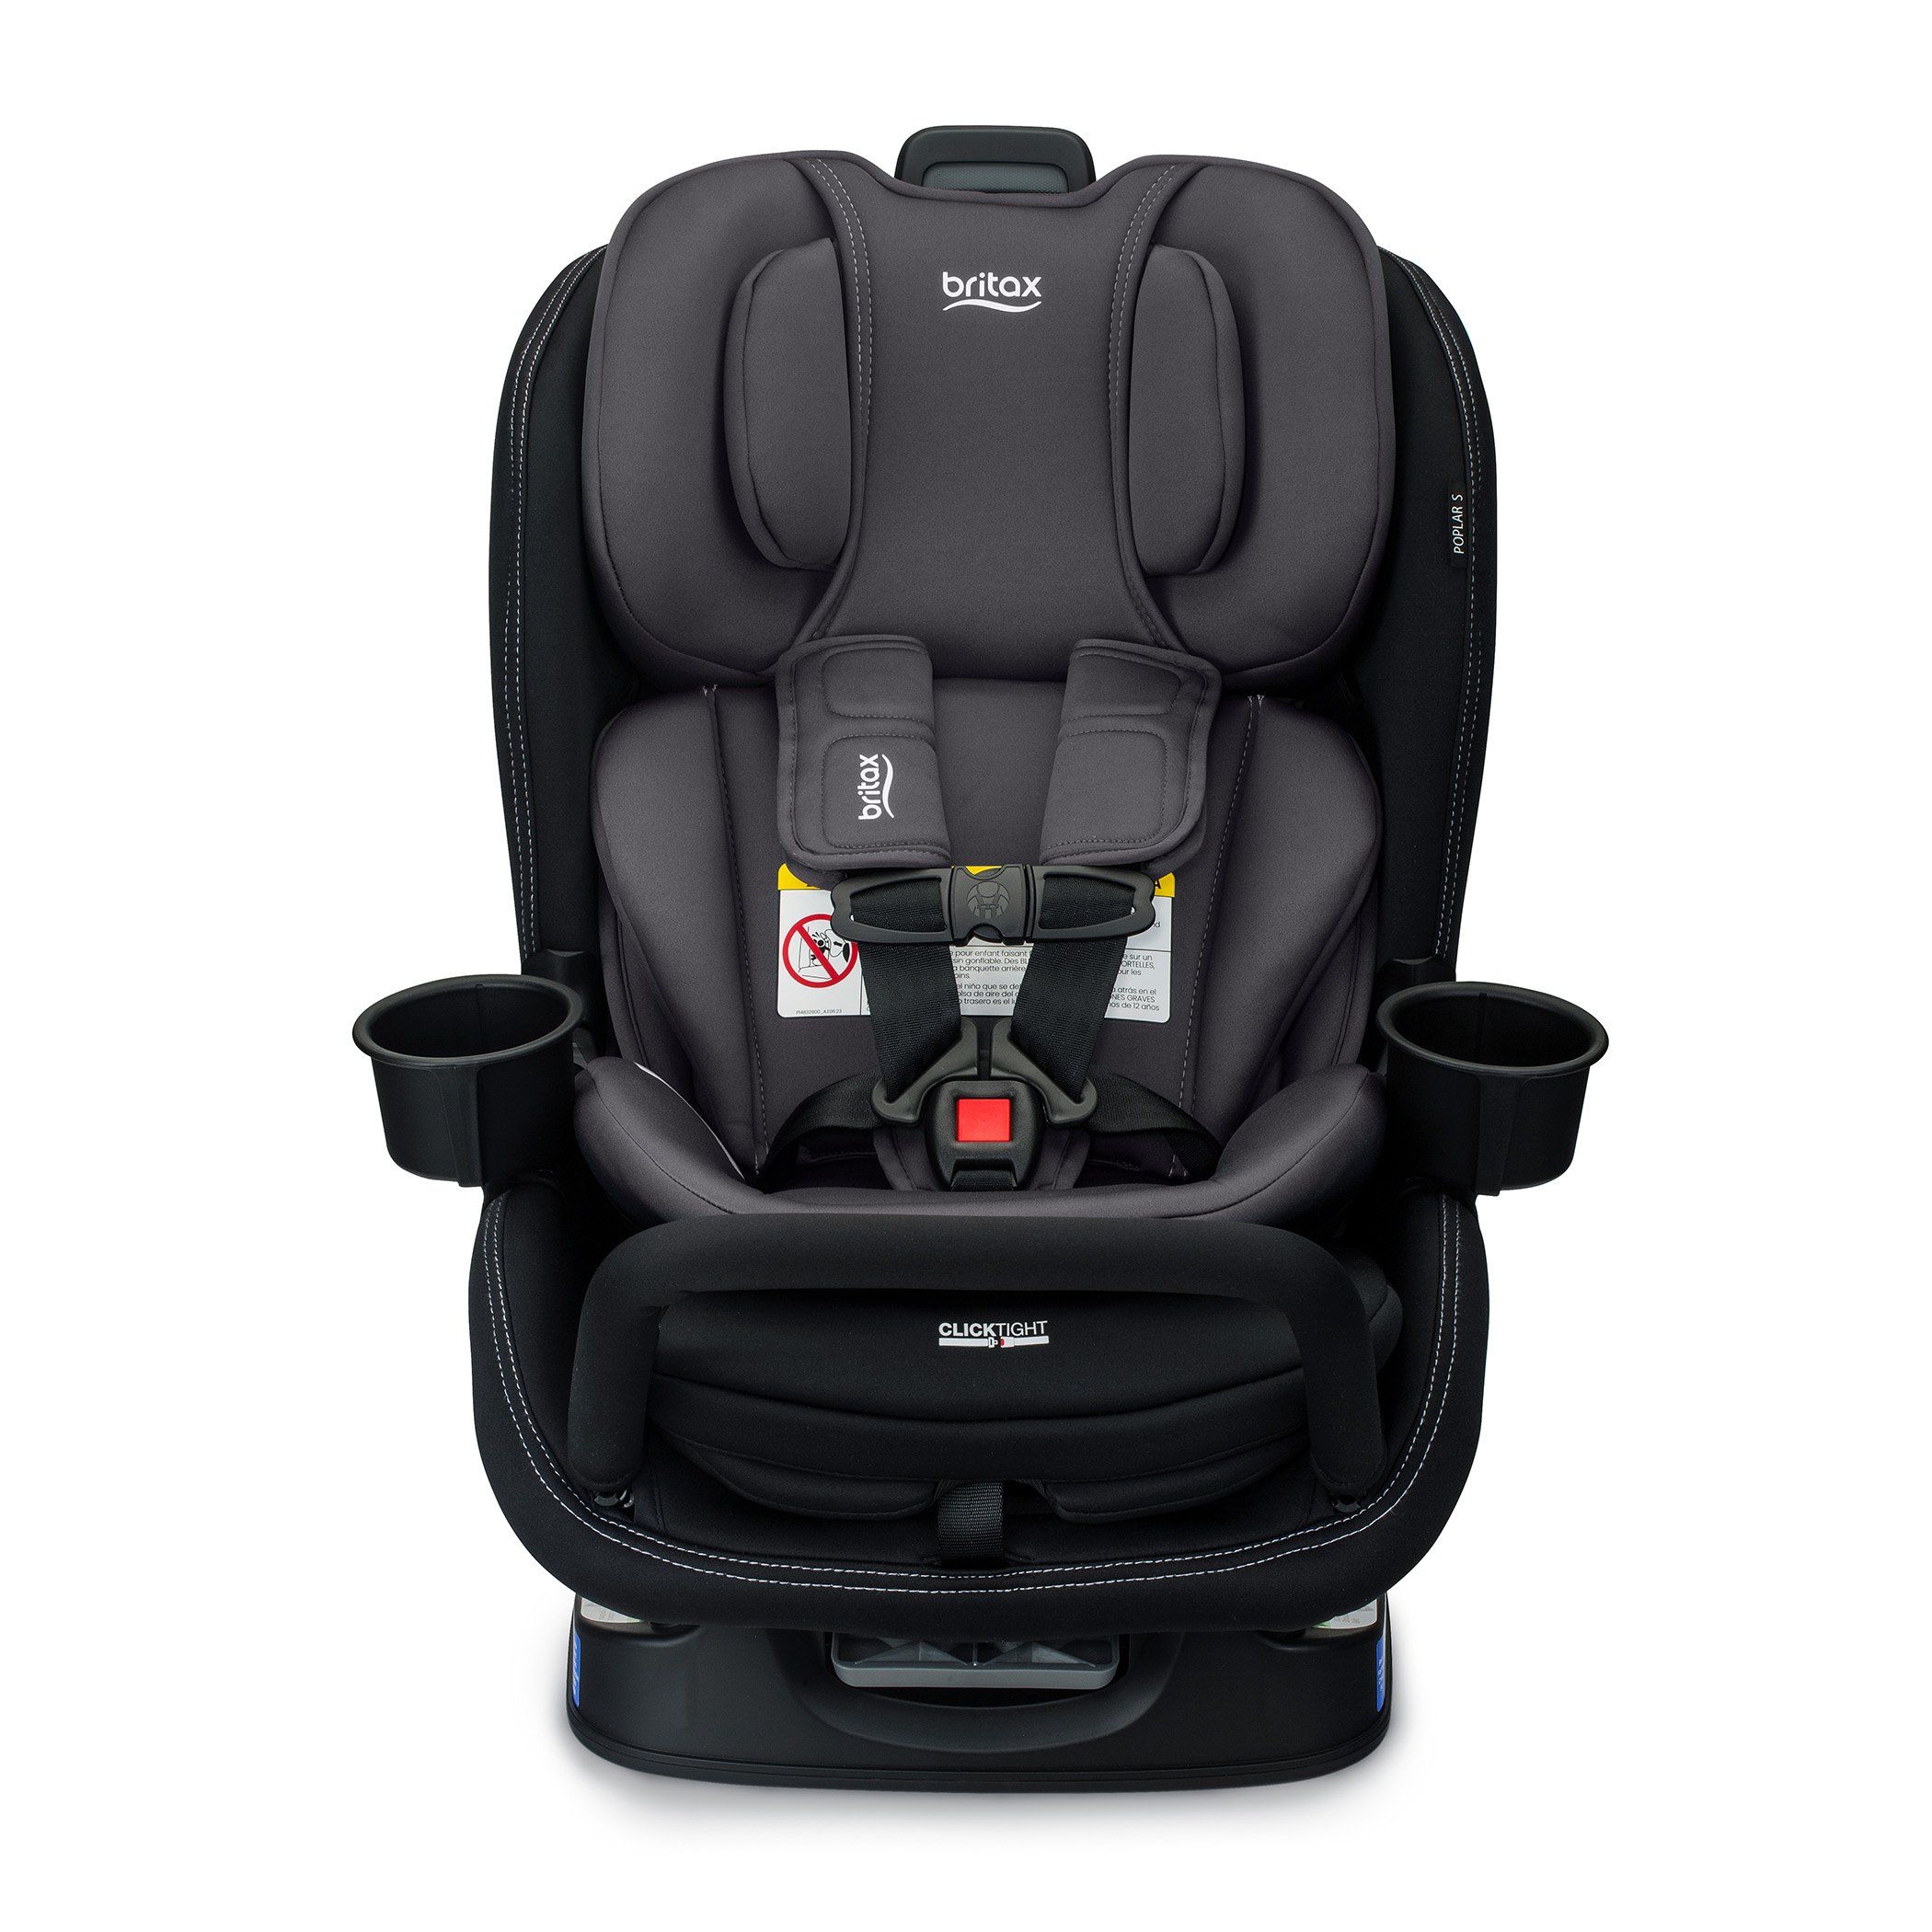 Center Facing Poplar S Stone Onyx Britax car seat with an anti-rebound bar and two cup holders.   